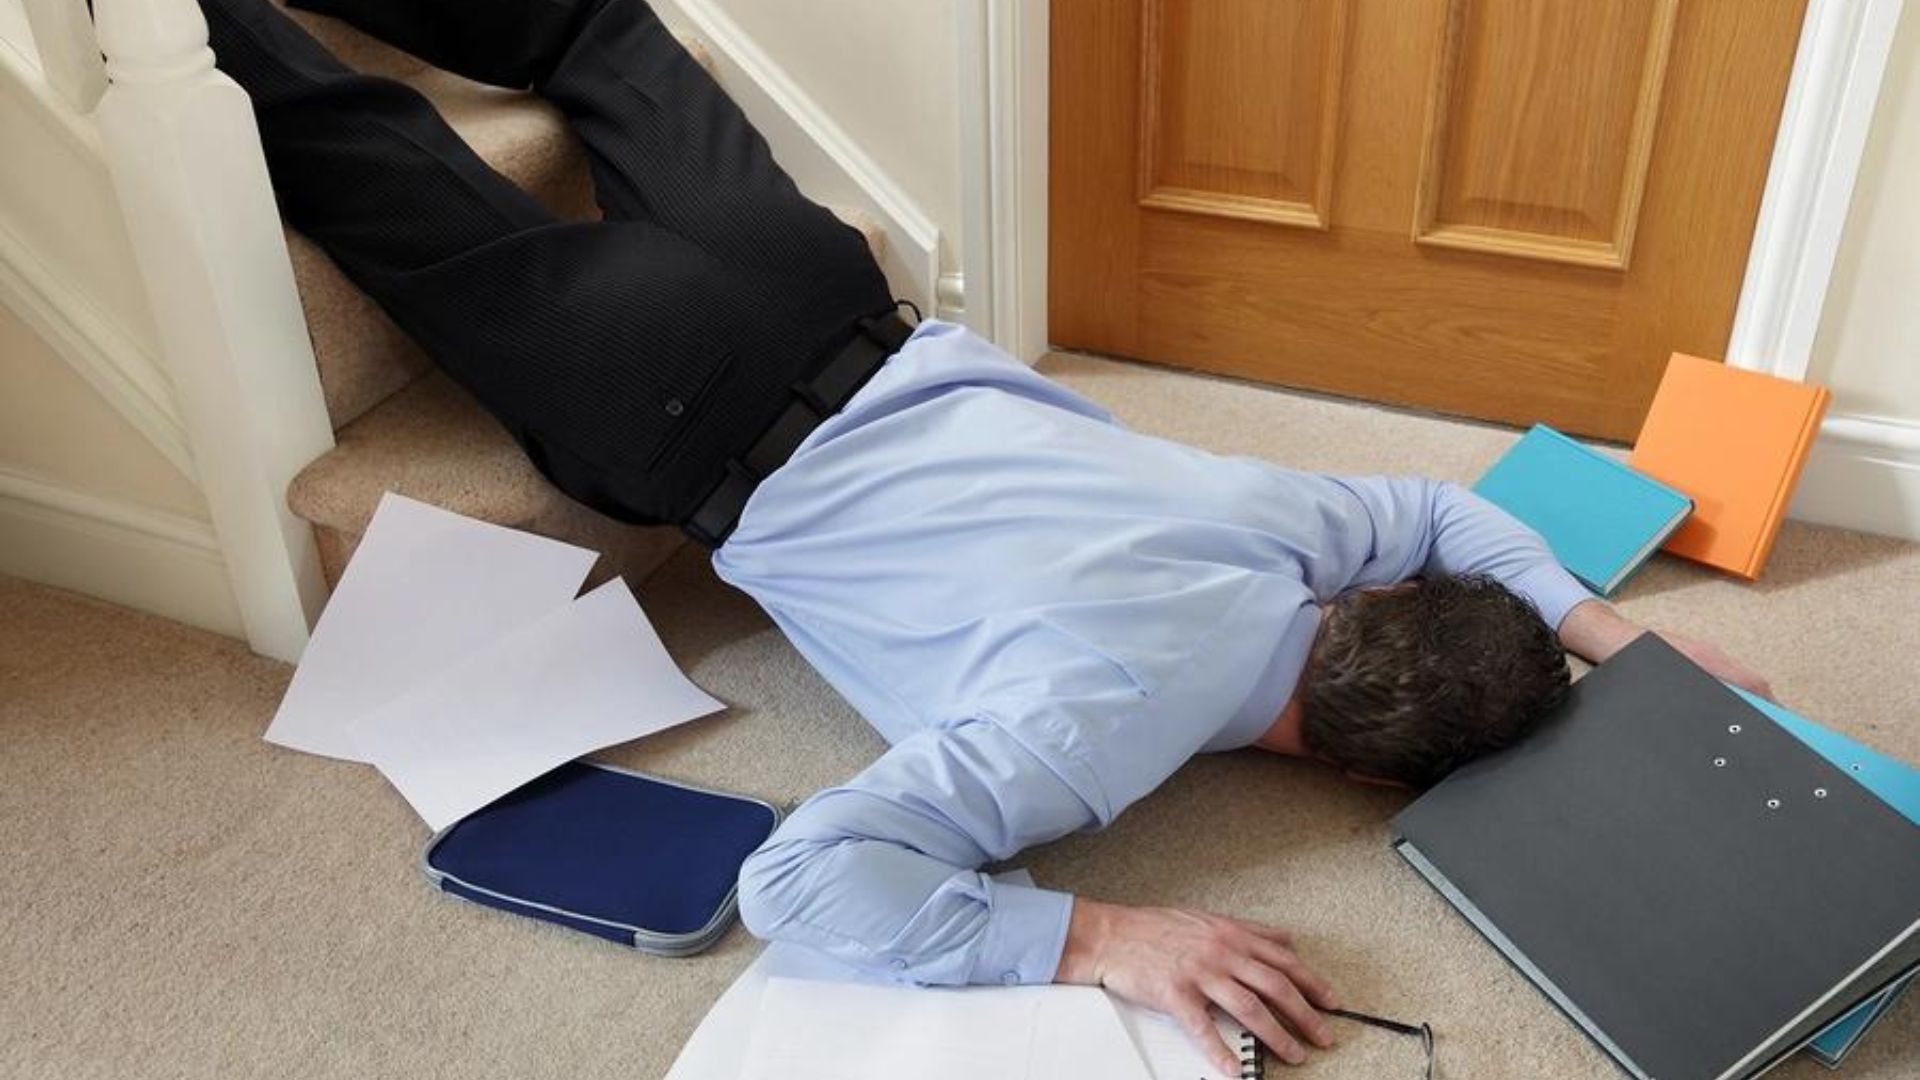 An Office Man Fall From Stairs With Files